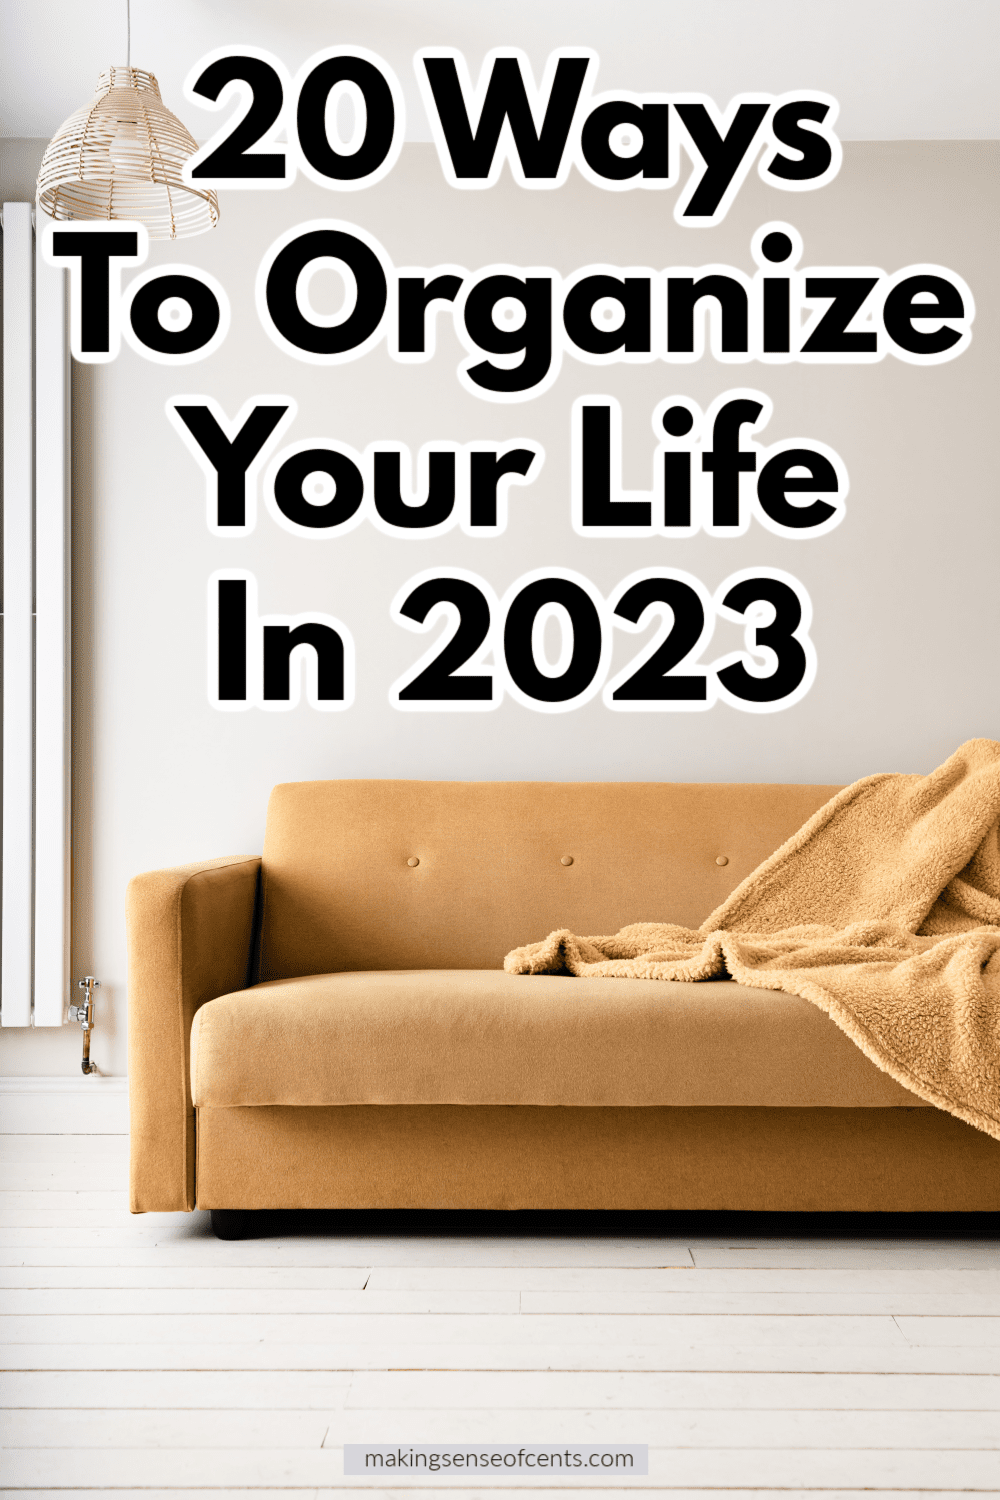 20 Ways To Organize Your Life In 2023 